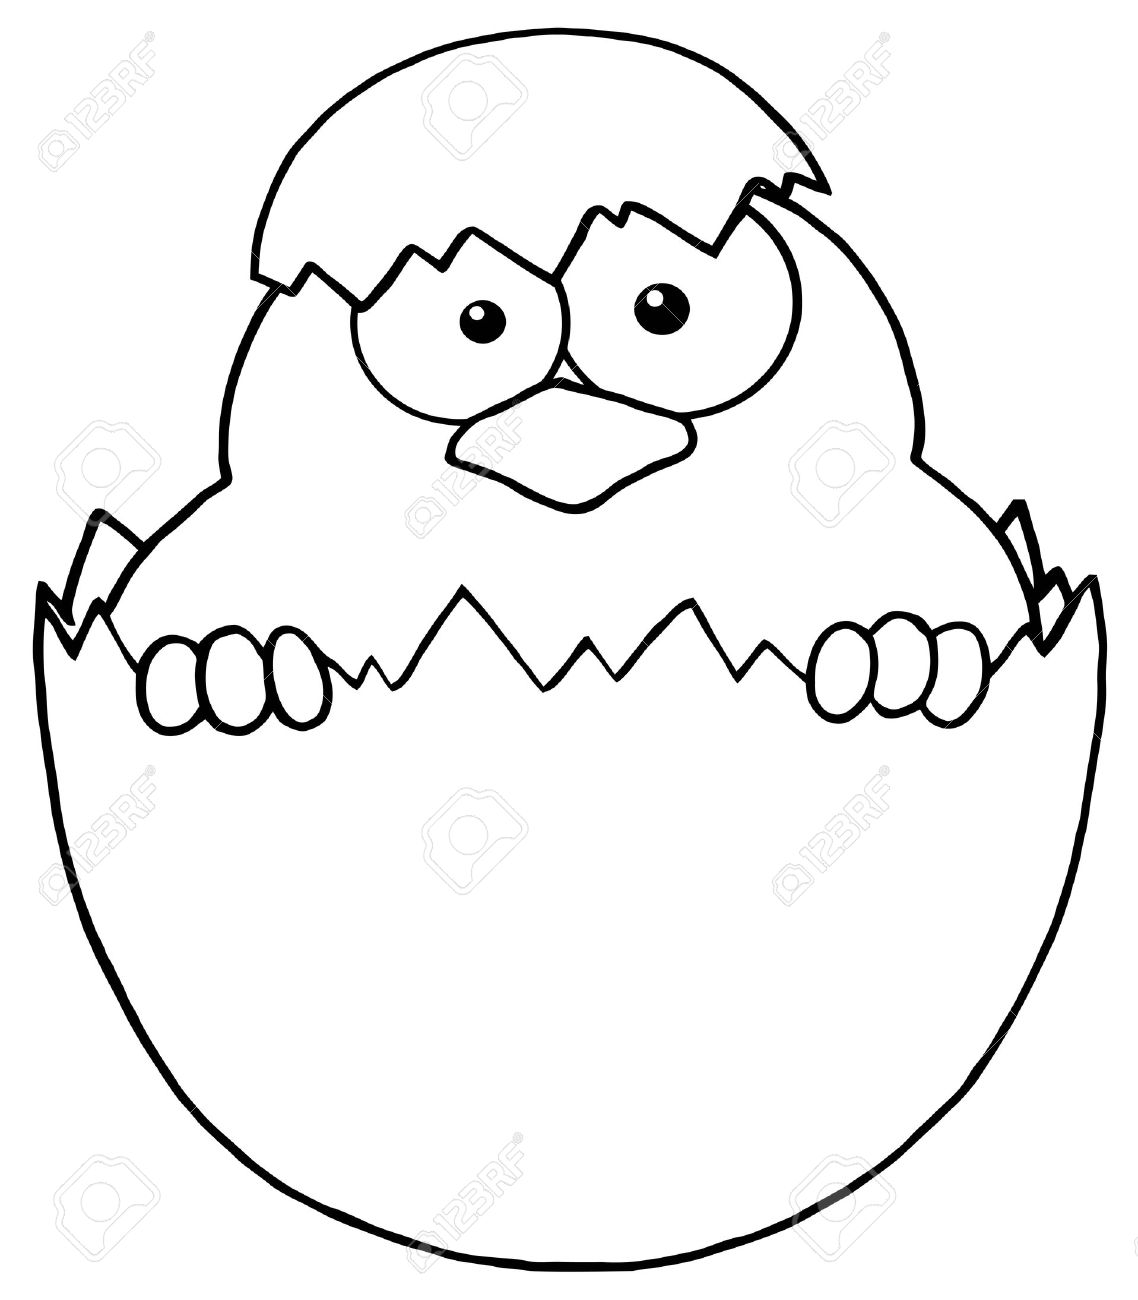 Free Egg Cracked Egg Collection Png Image Clipart